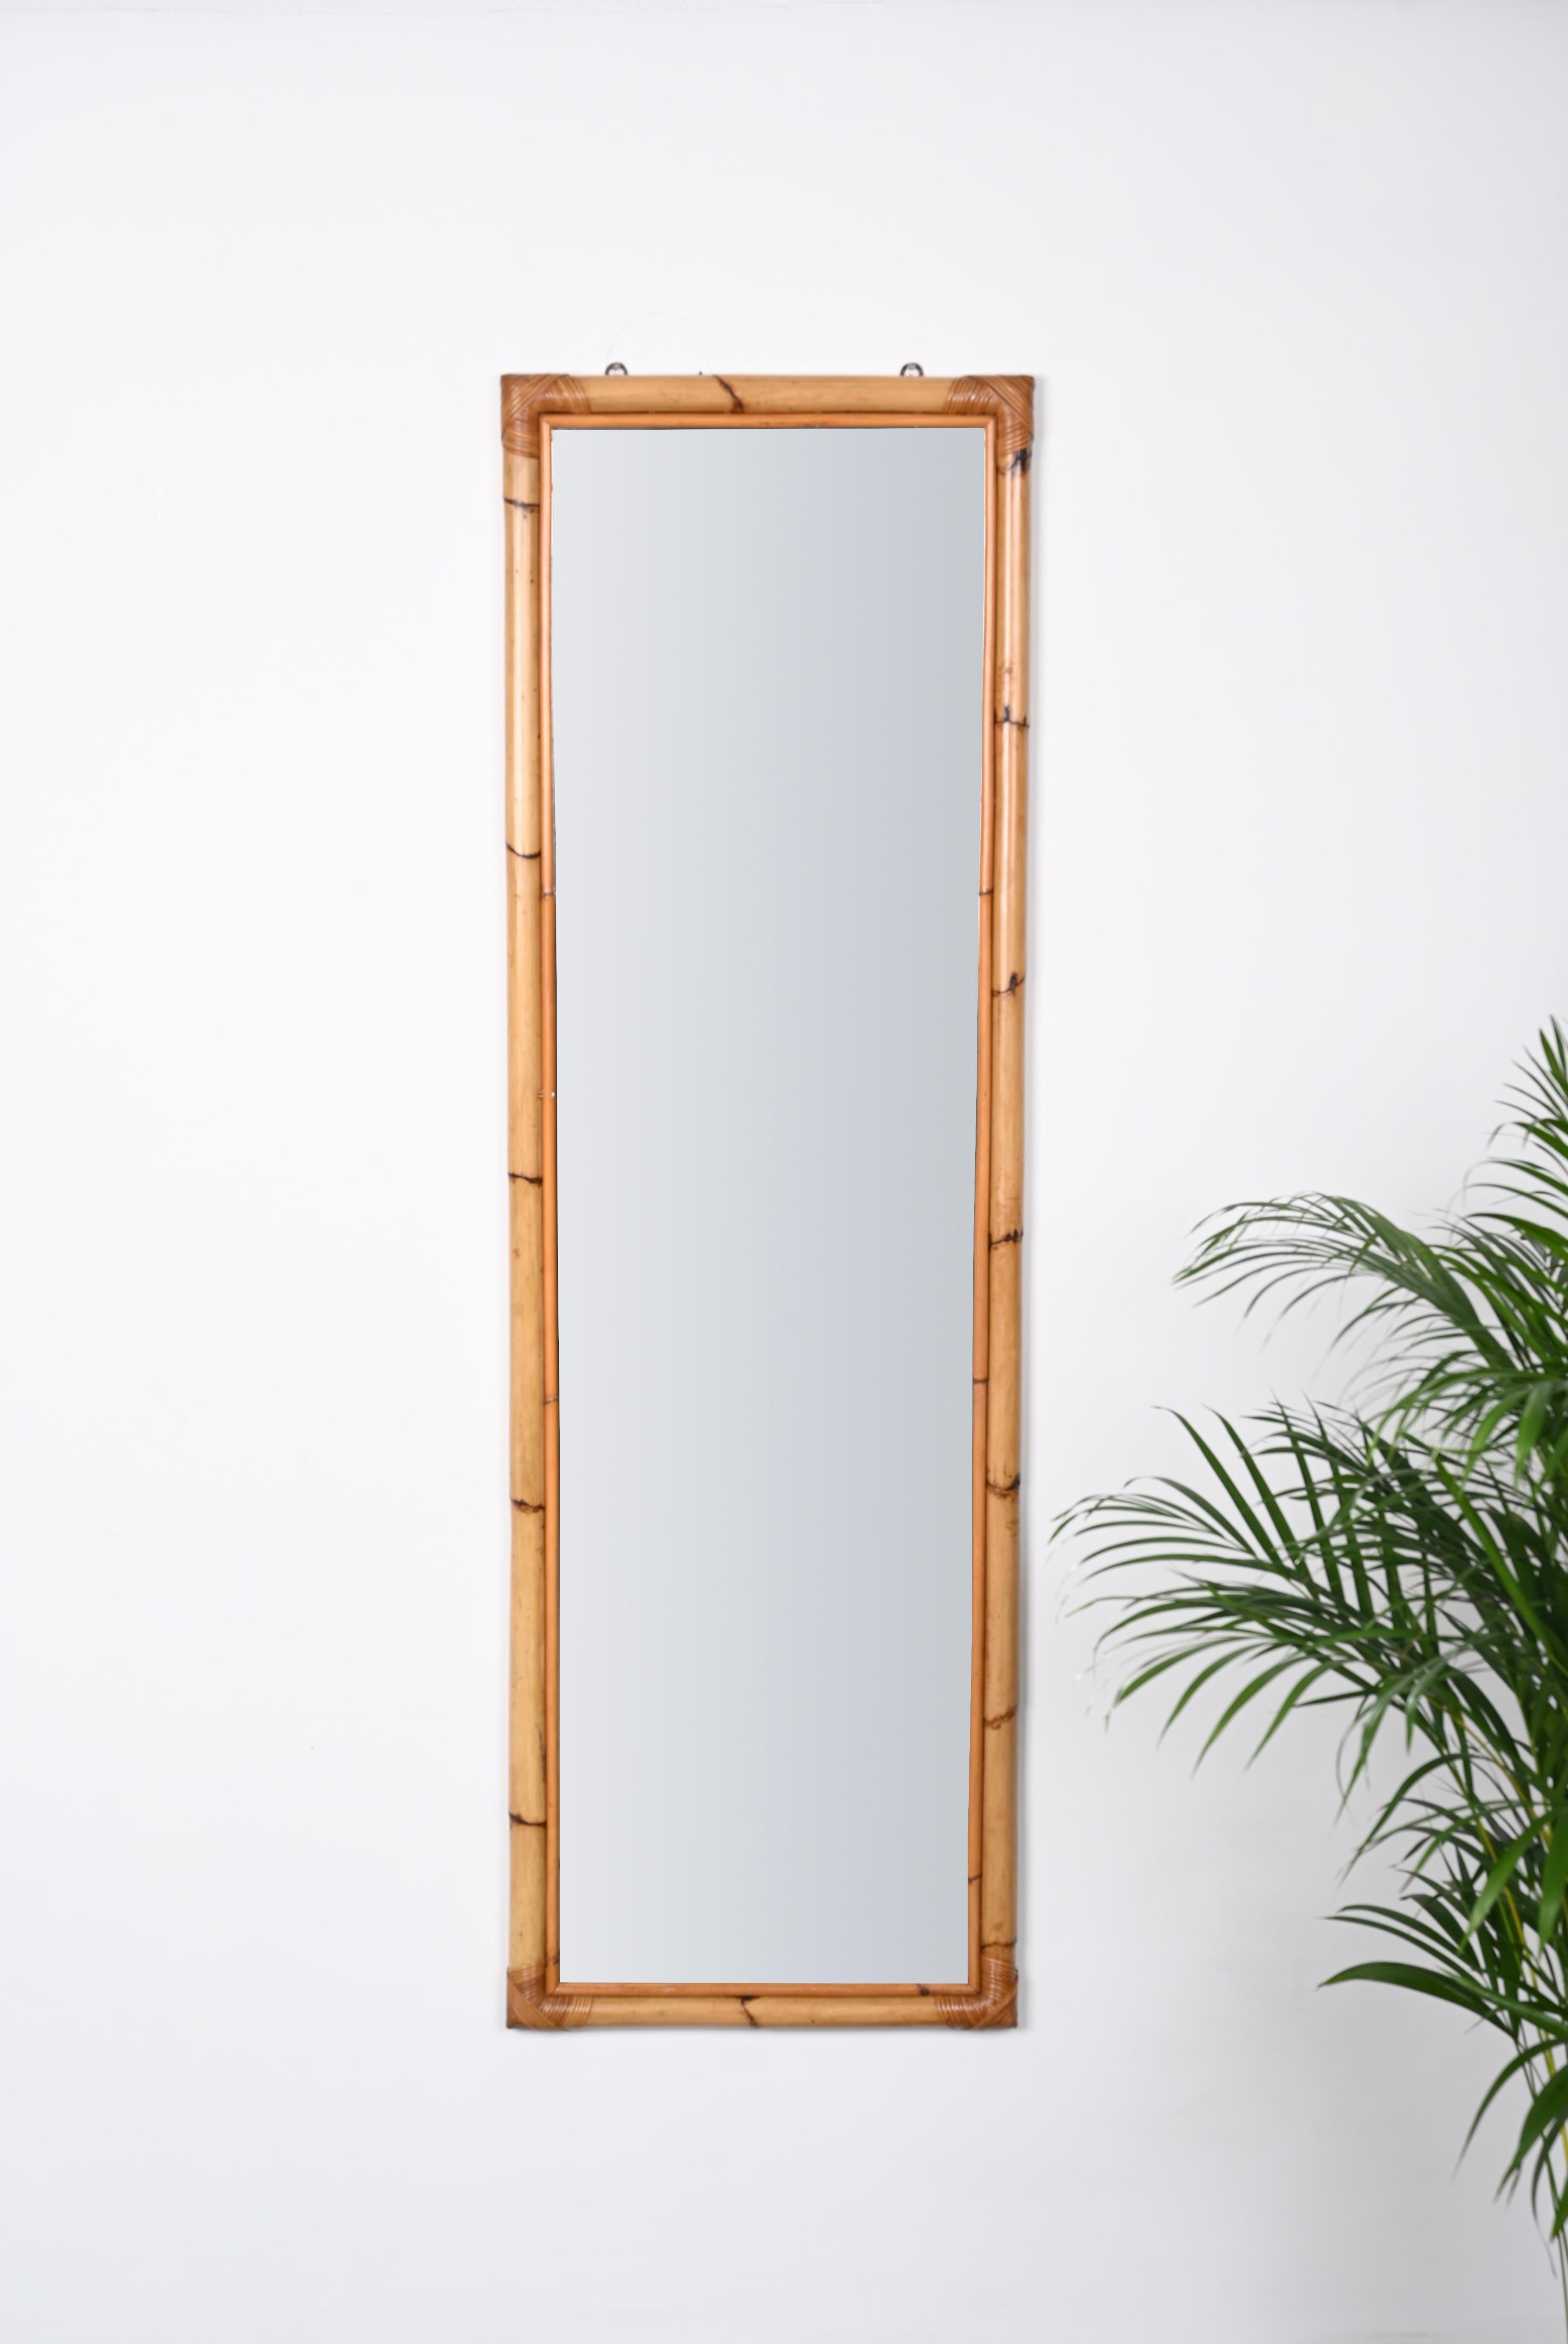 Midcentury Rectangular Mirror with Bamboo and Rattan Frame, Italy, 1970s For Sale 1